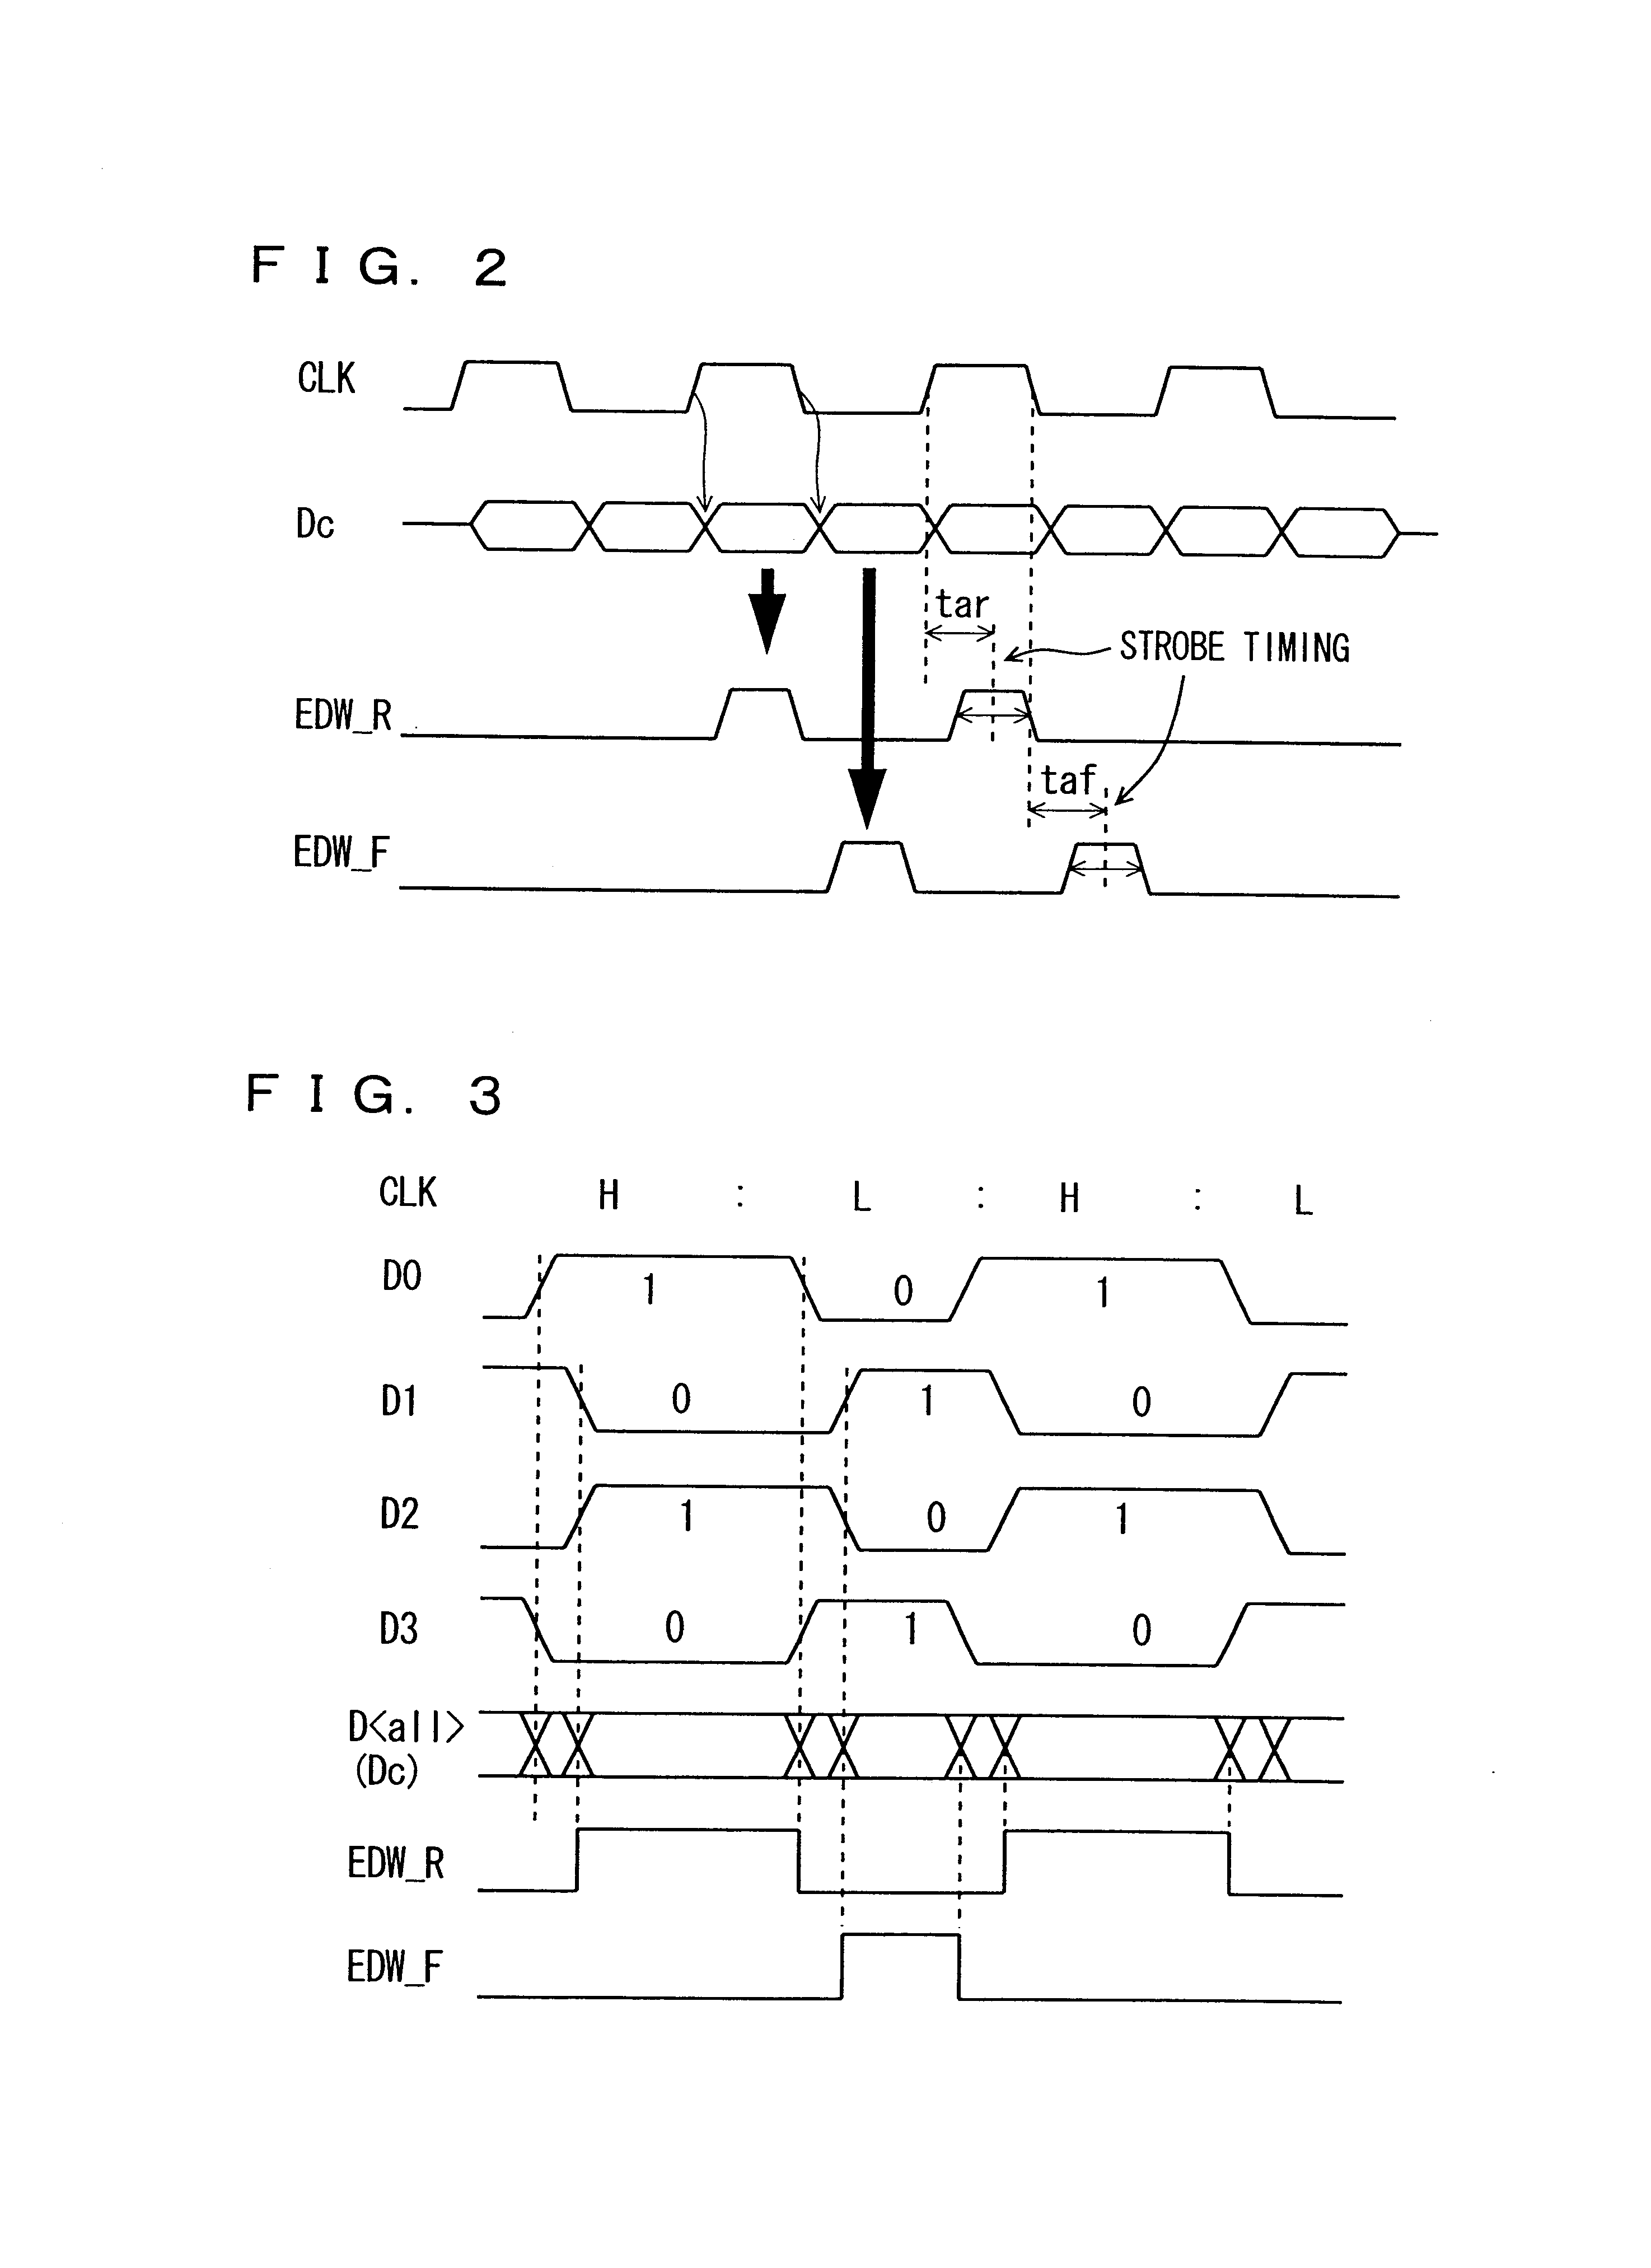 Interface circuit device for performing data sampling at optimum strobe timing by using stored data window information to determine the strobe timing